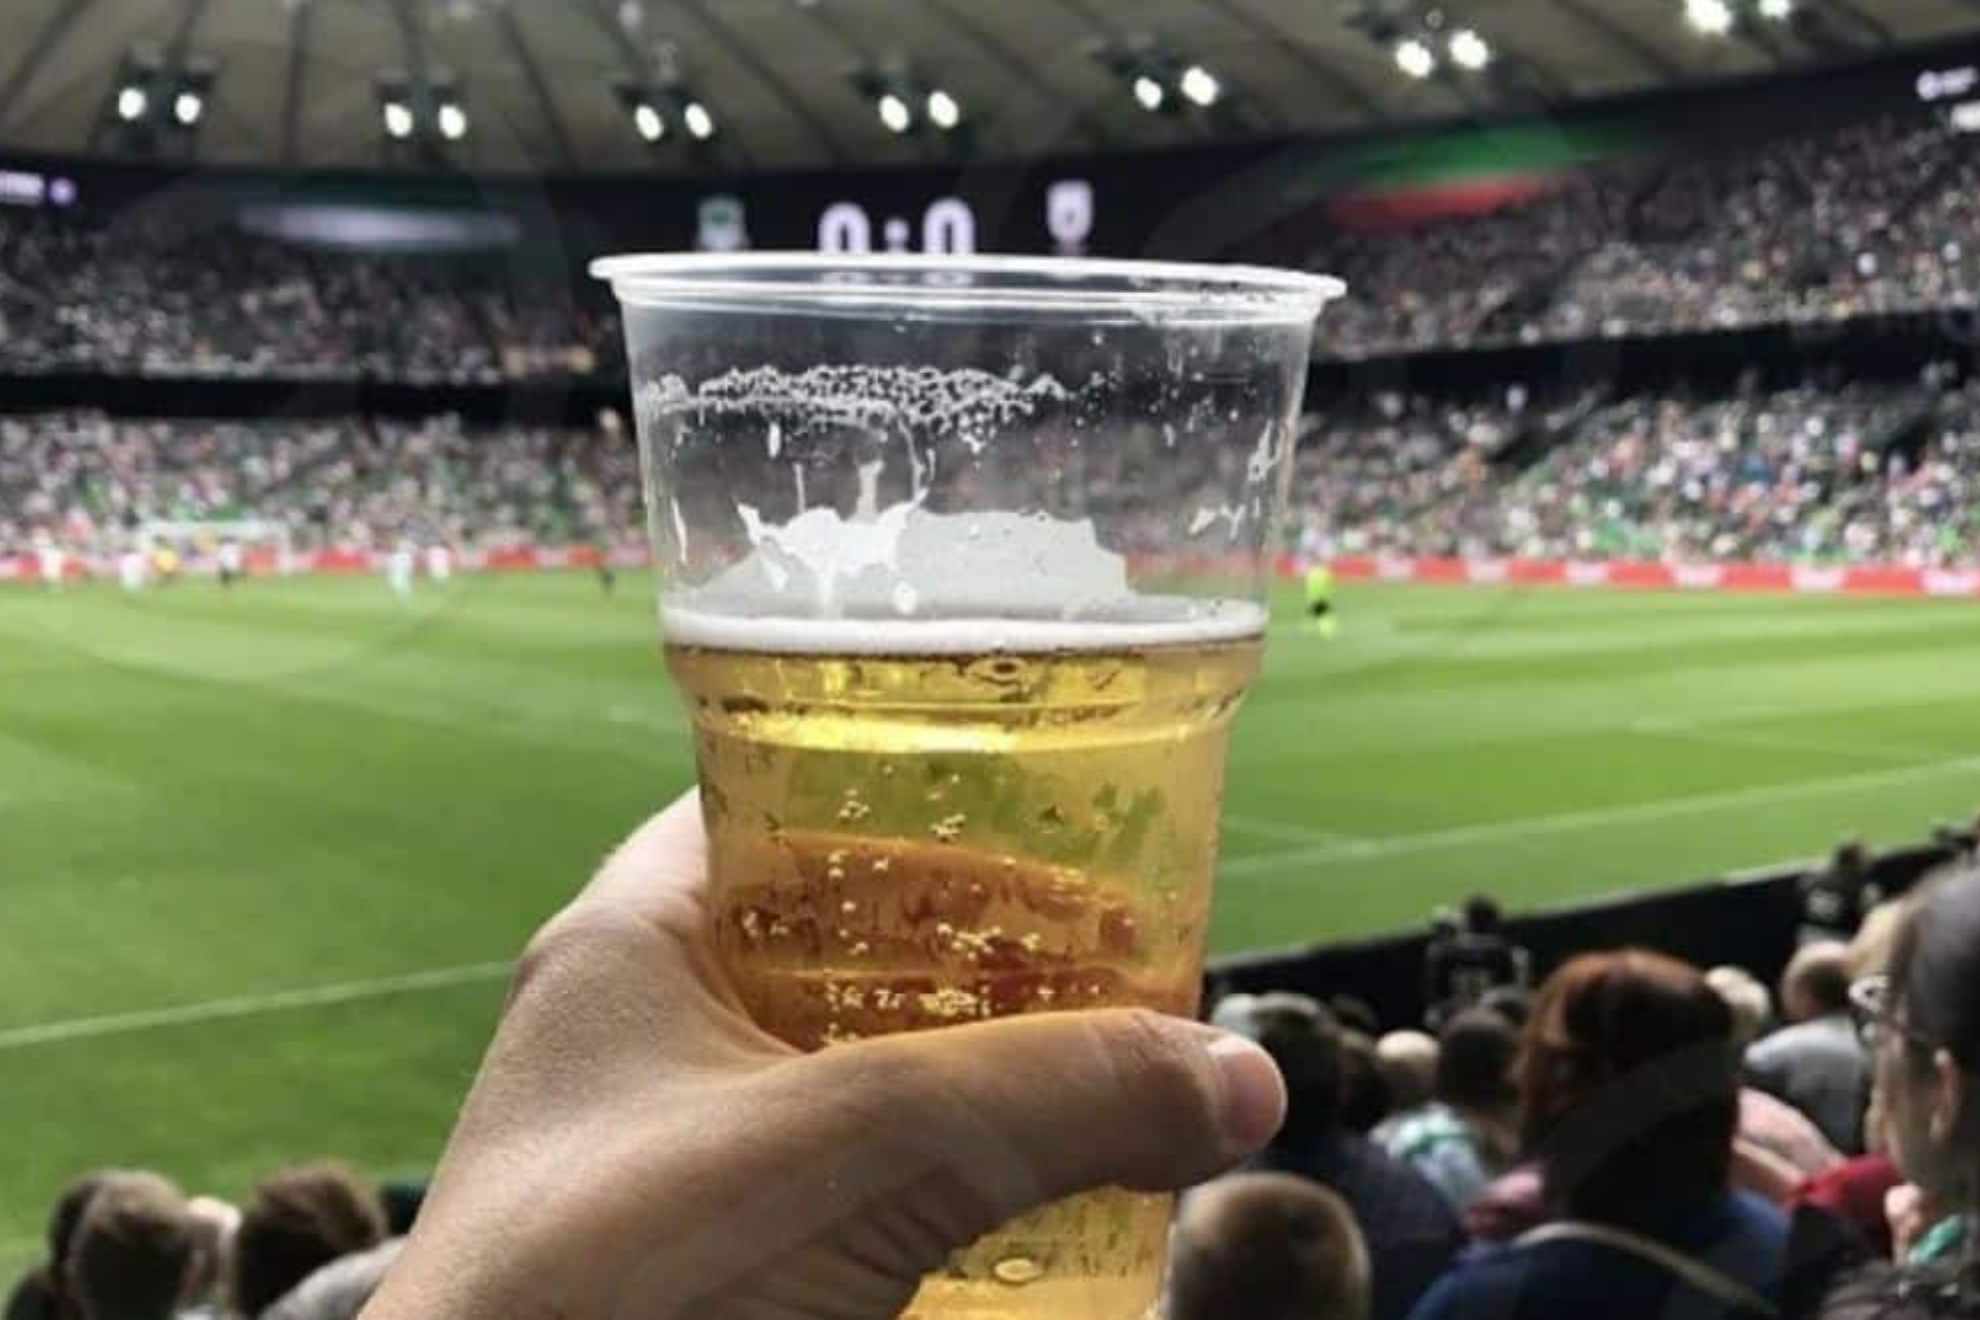 Beer will not be available to fans in Paris